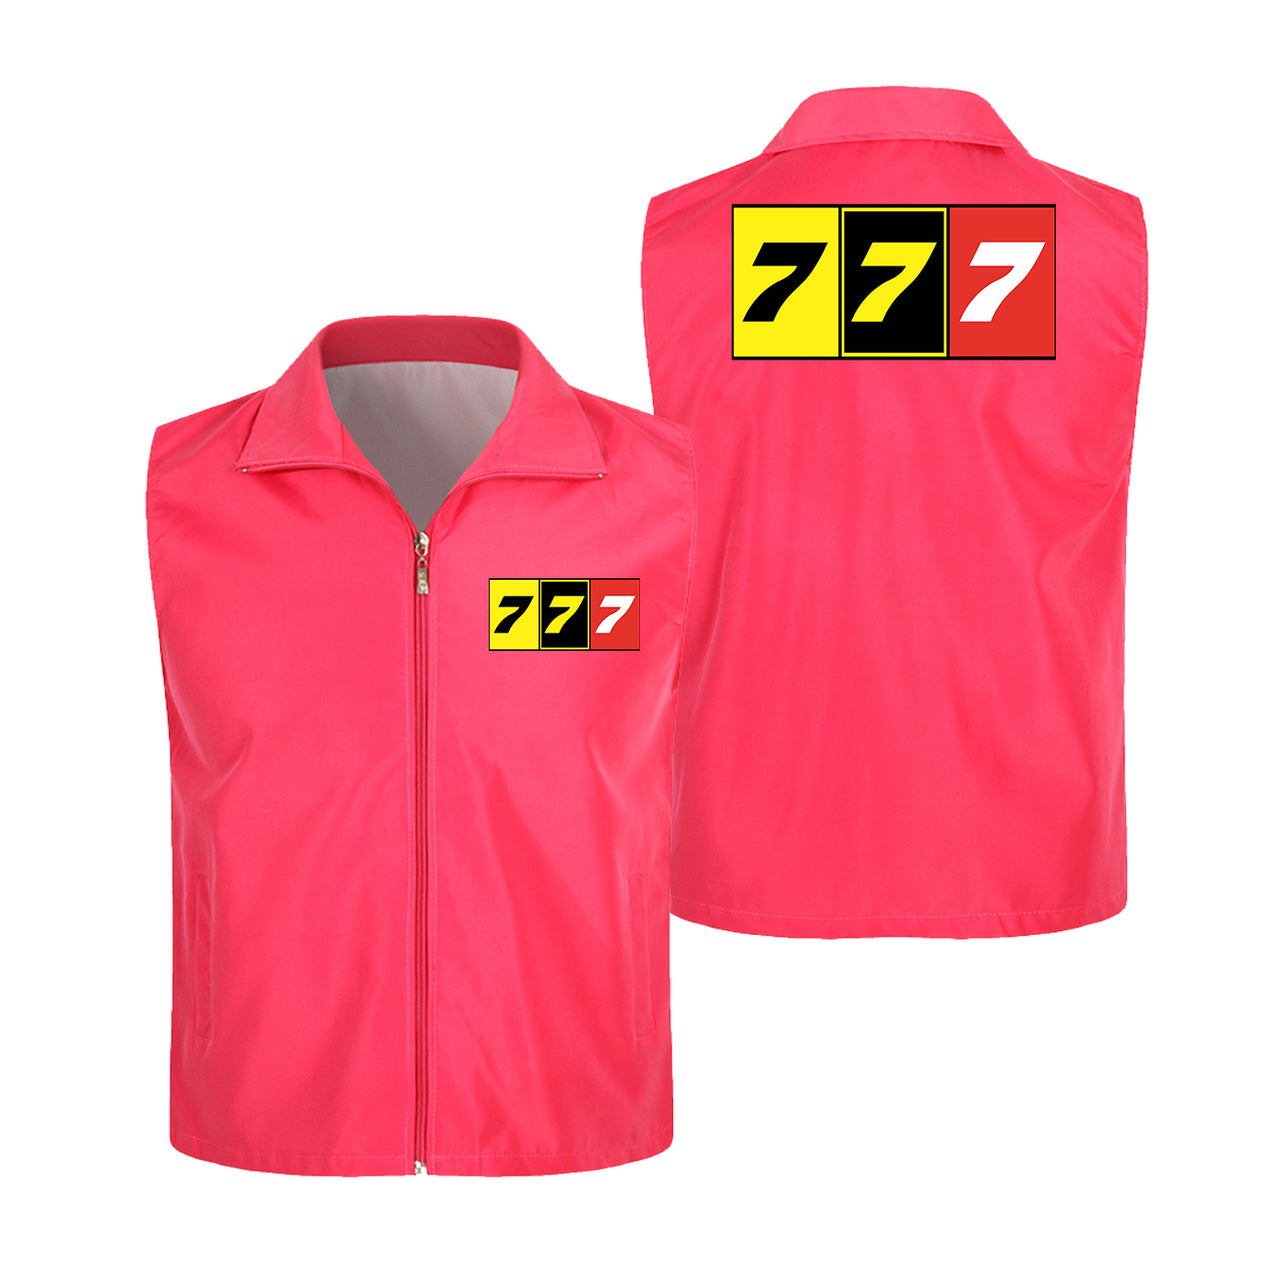 Flat Colourful 777 Designed Thin Style Vests